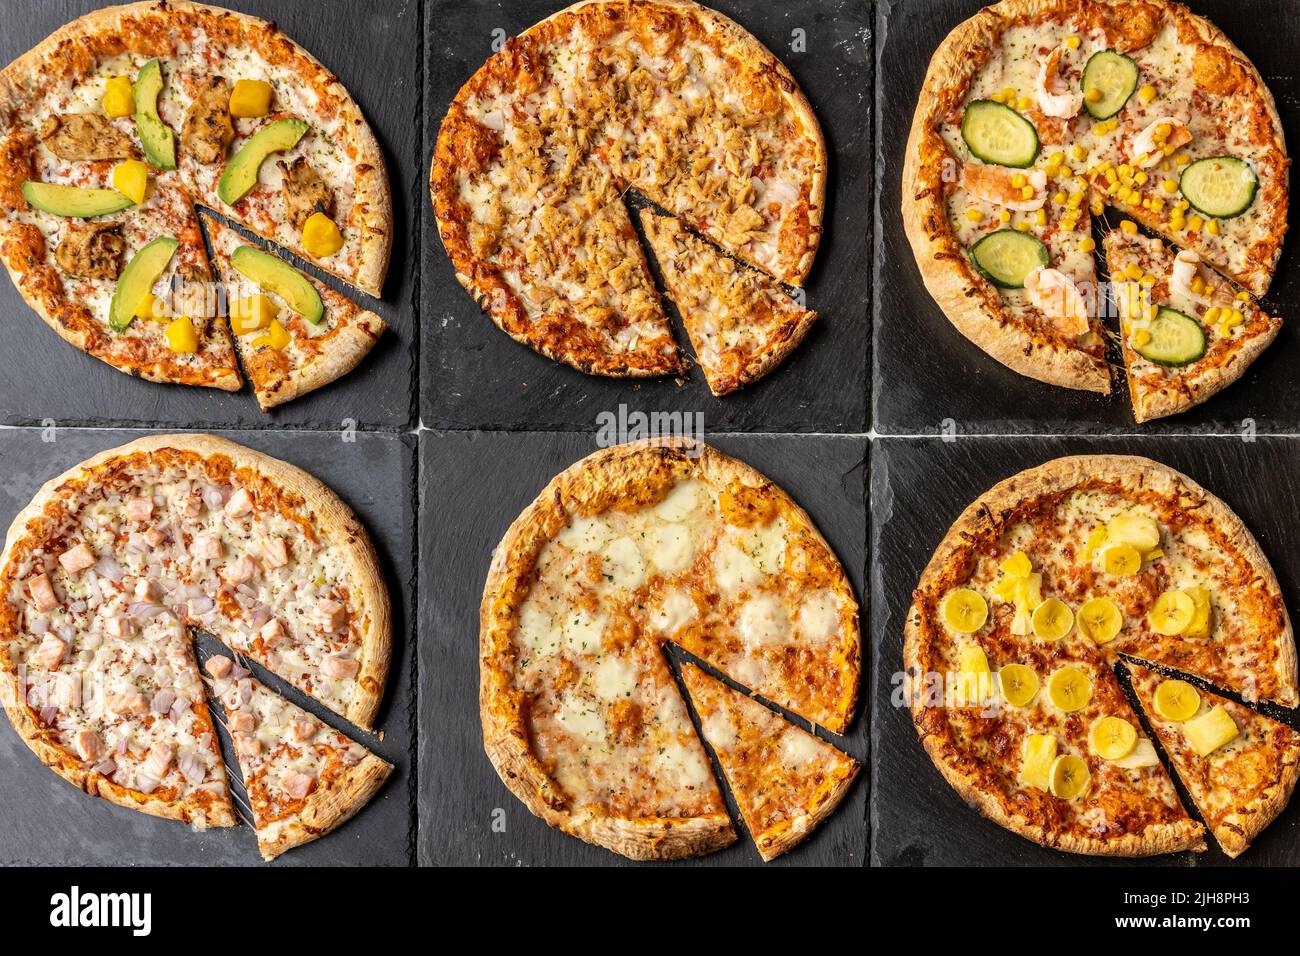 A set of different California-style nontraditional pizzas on black serving plates Stock Photo